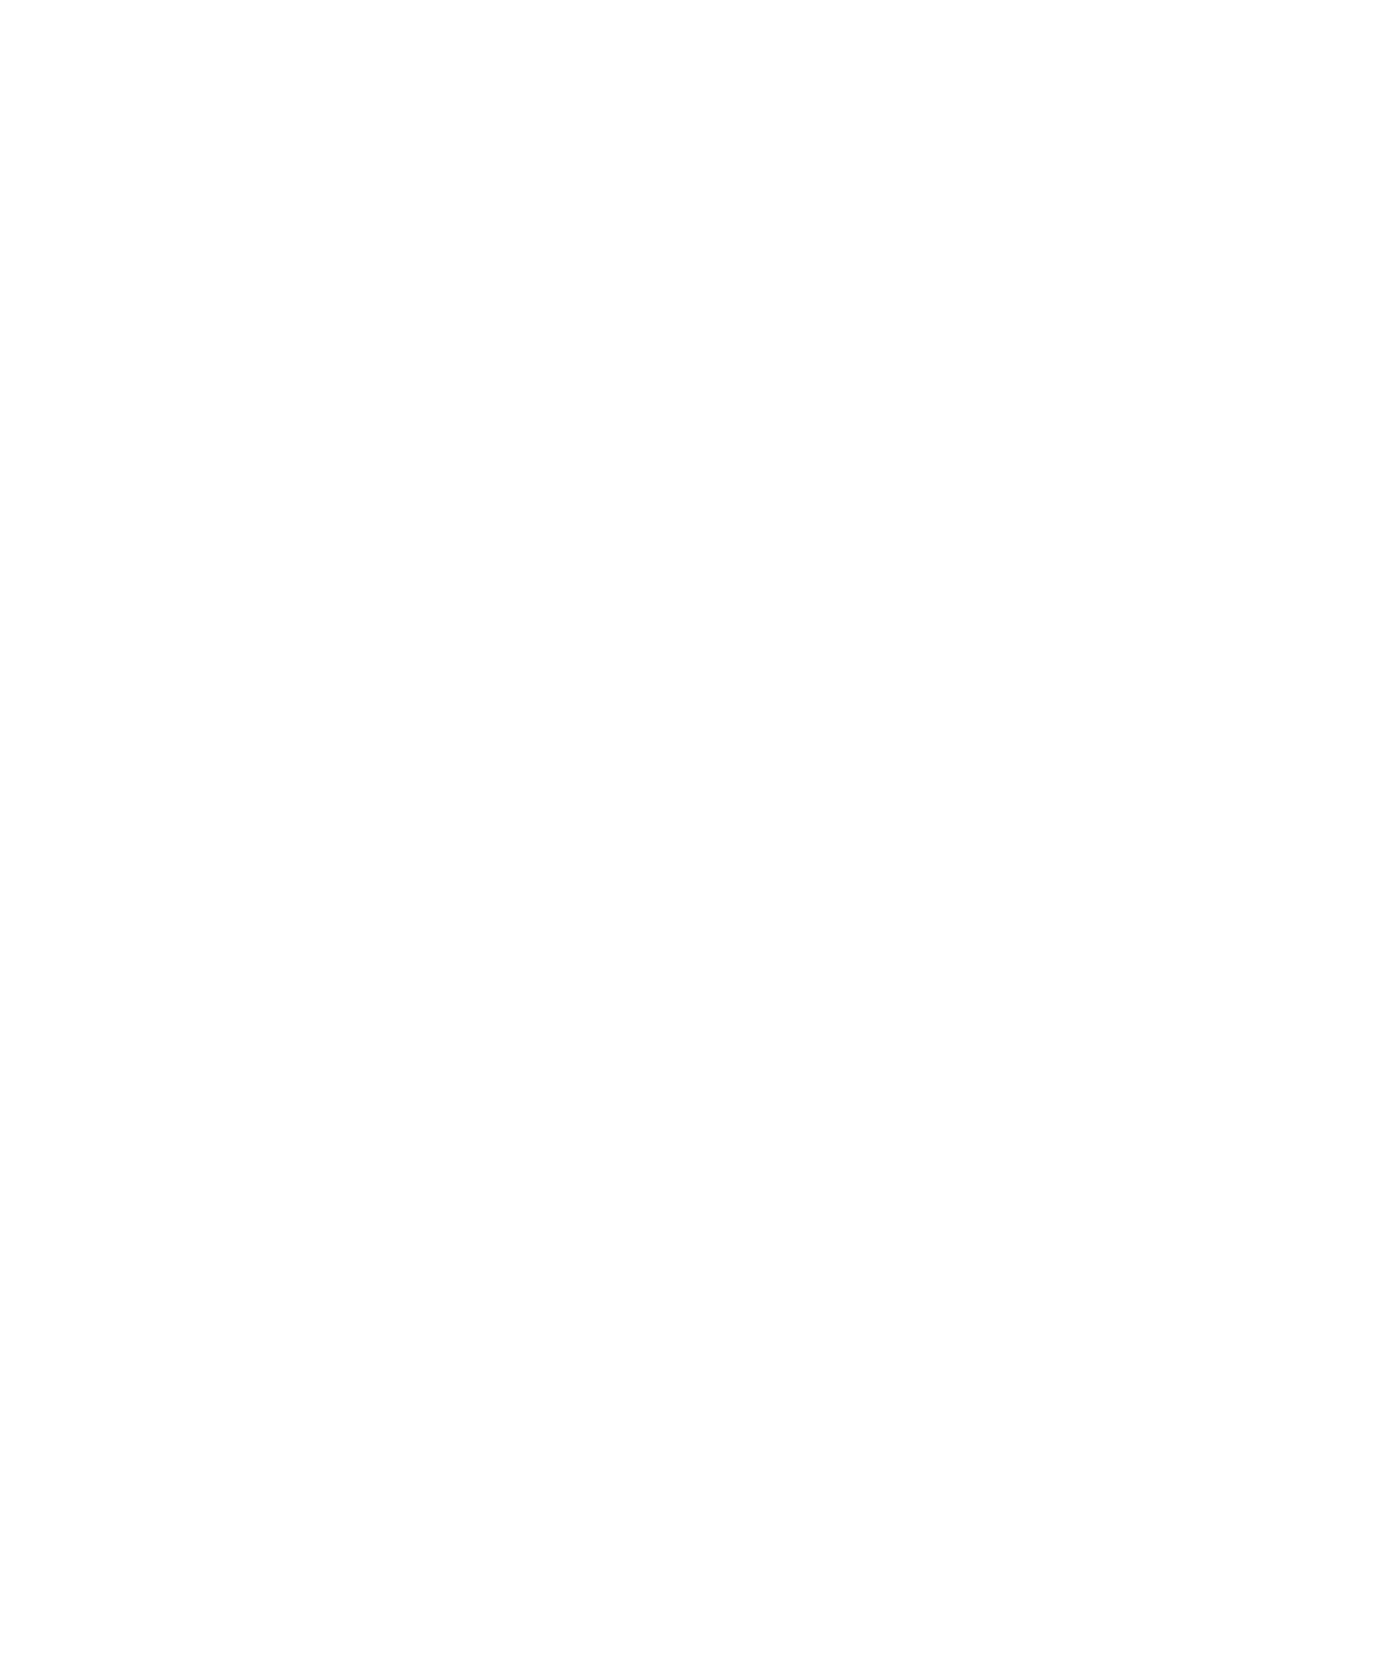 The future belongs to text